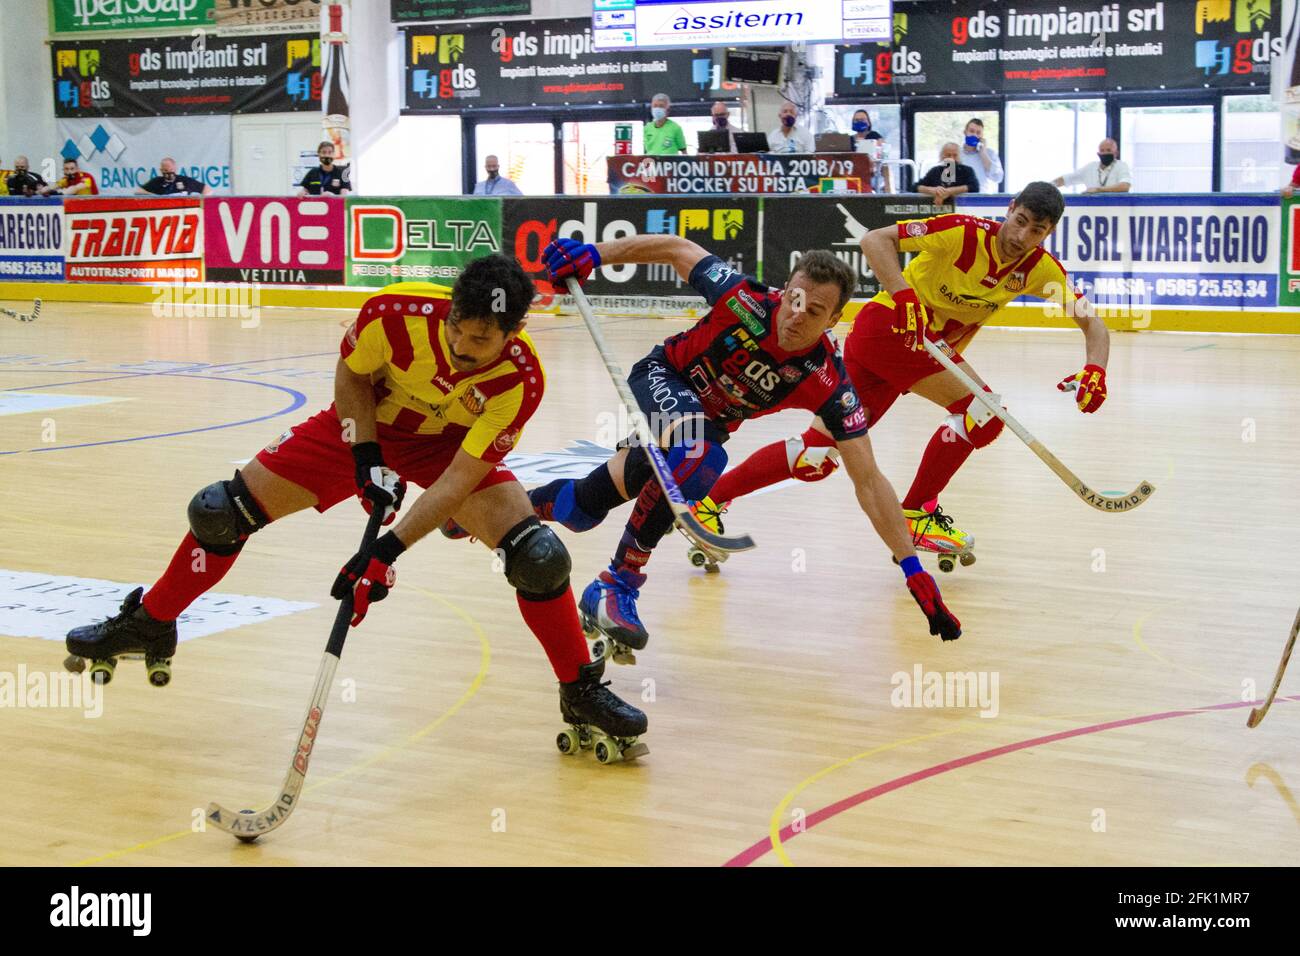 Forte Dei Marmi, Italy. 25th Apr, 2021. Final of the Italian Cup, A1 series  rink hockey, Forte dei Marmi - Lodi. a moment of the match with Lodi in the  attack phase (